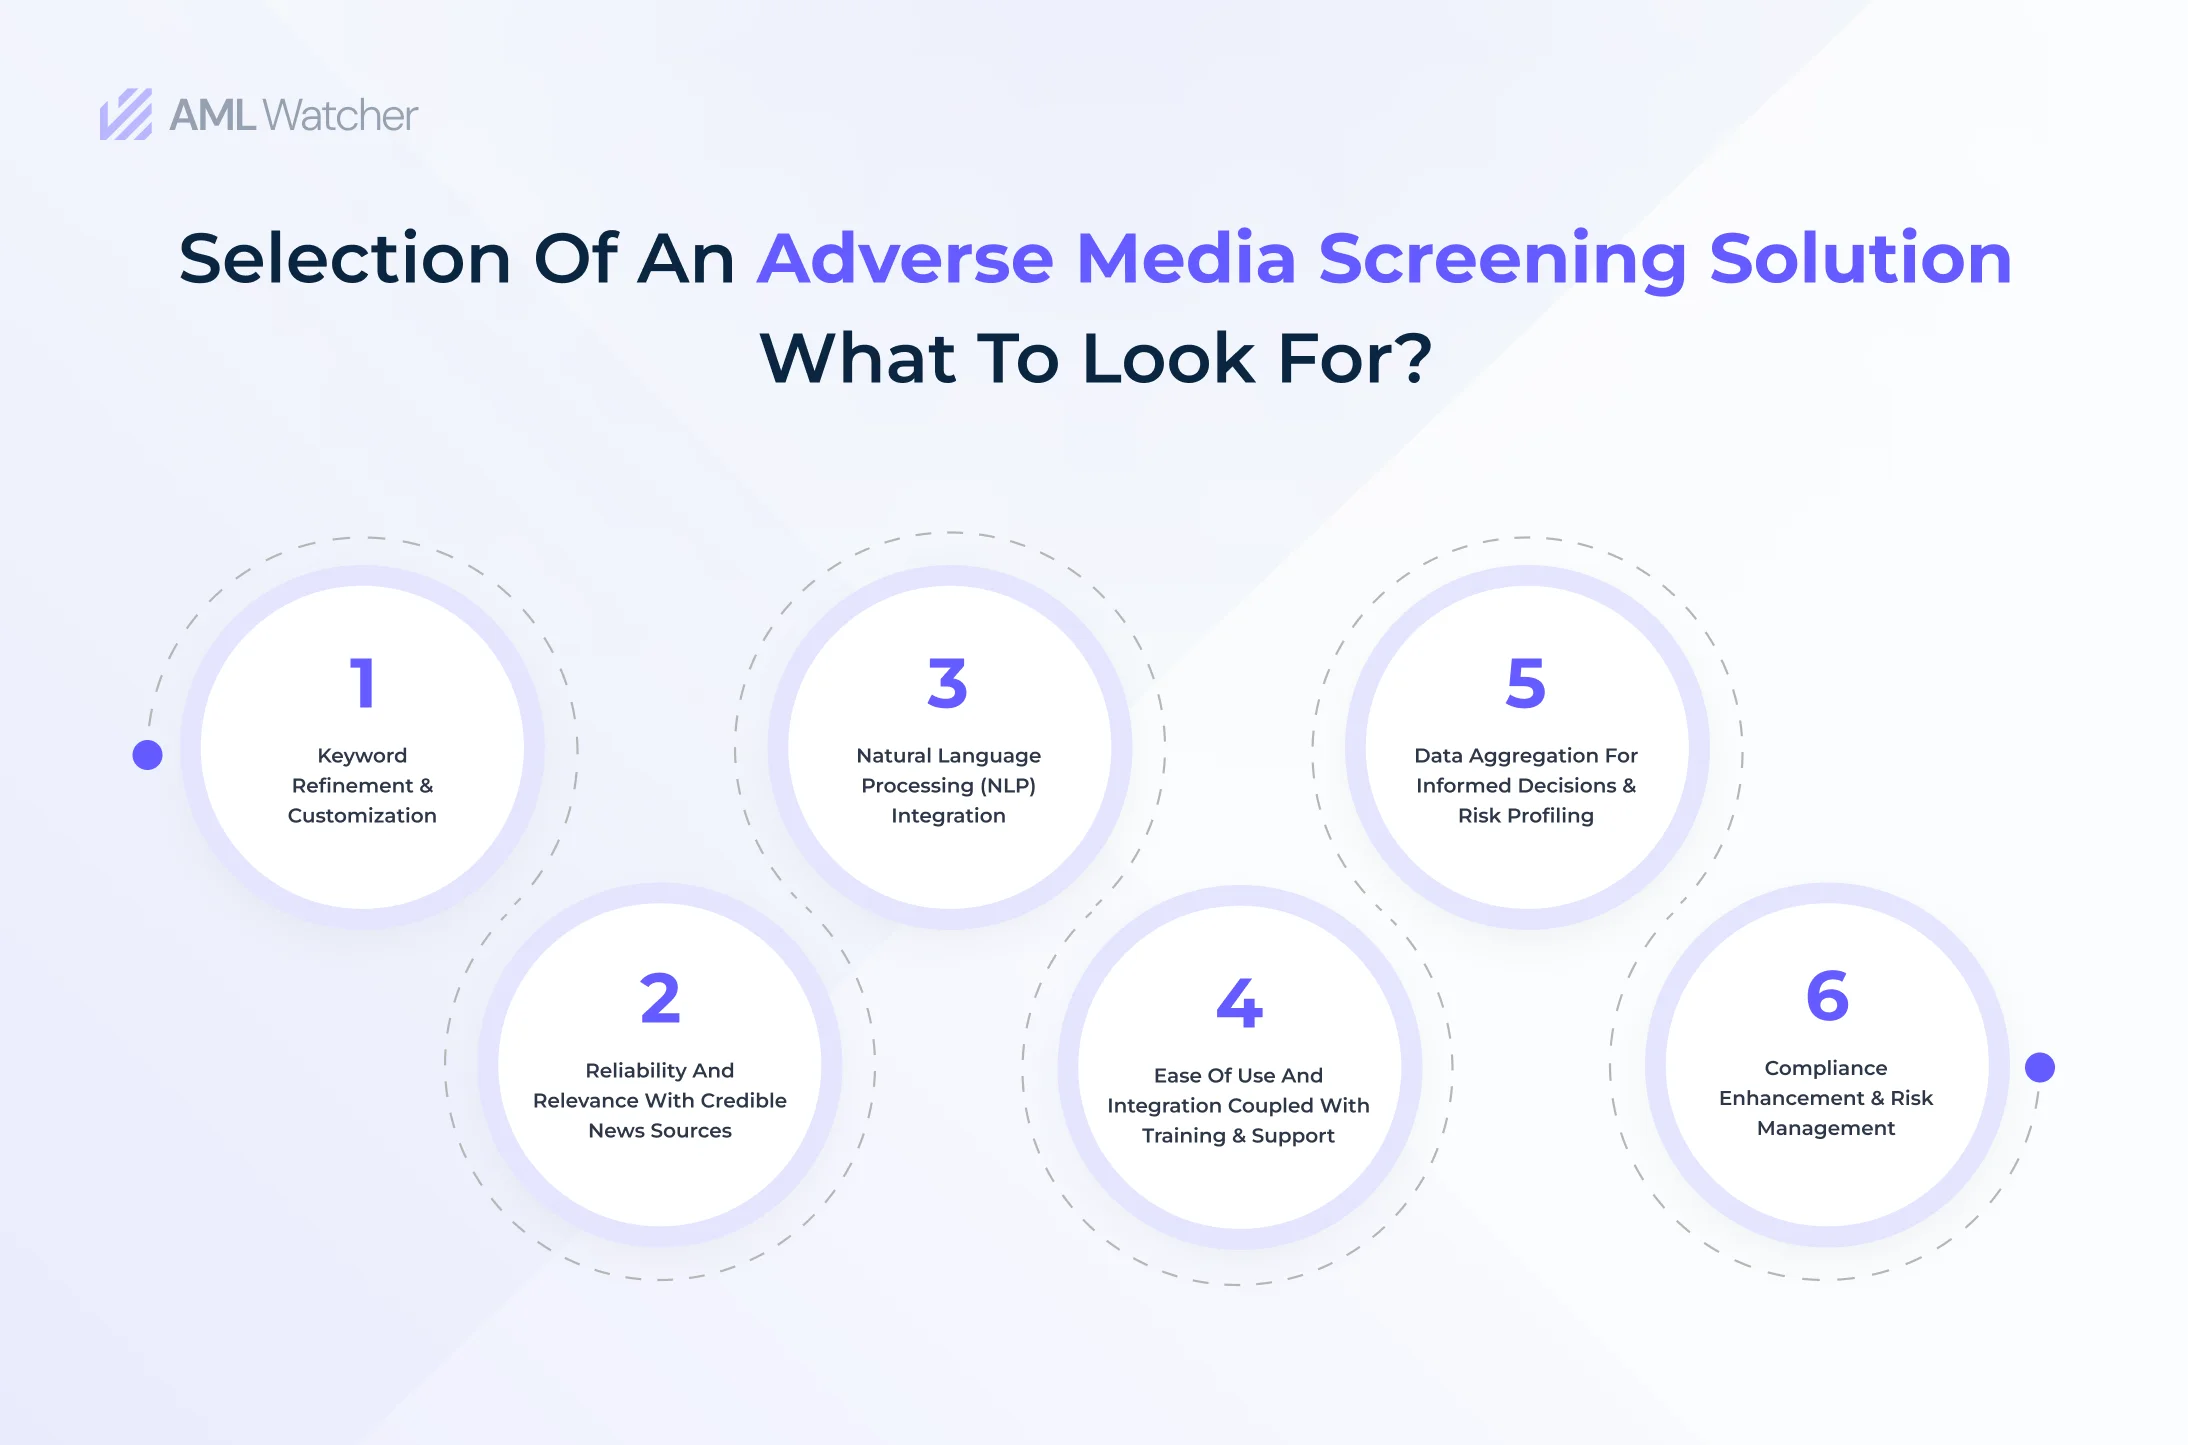 Key elements to look for when selecting an efficient and technically compliant adverse media screening tool.